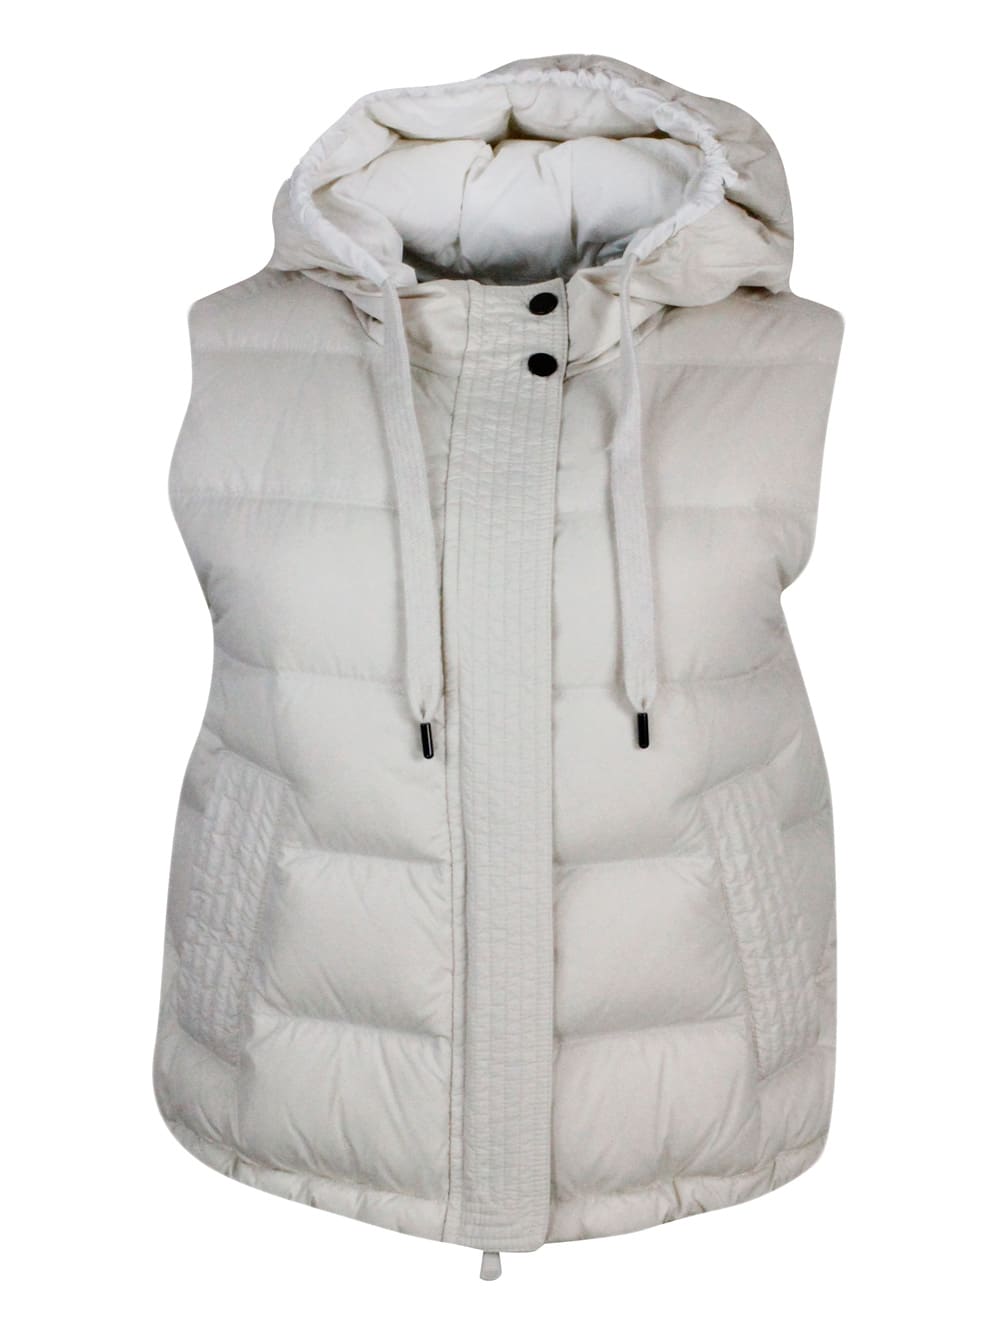 BRUNELLO CUCINELLI SLEEVELESS DOWN JACKET IN LIGHTWEIGHT NYLON WITH HOOD AND ROWS OF BRILLIANT JEWELS ALONG THE CLOSURE